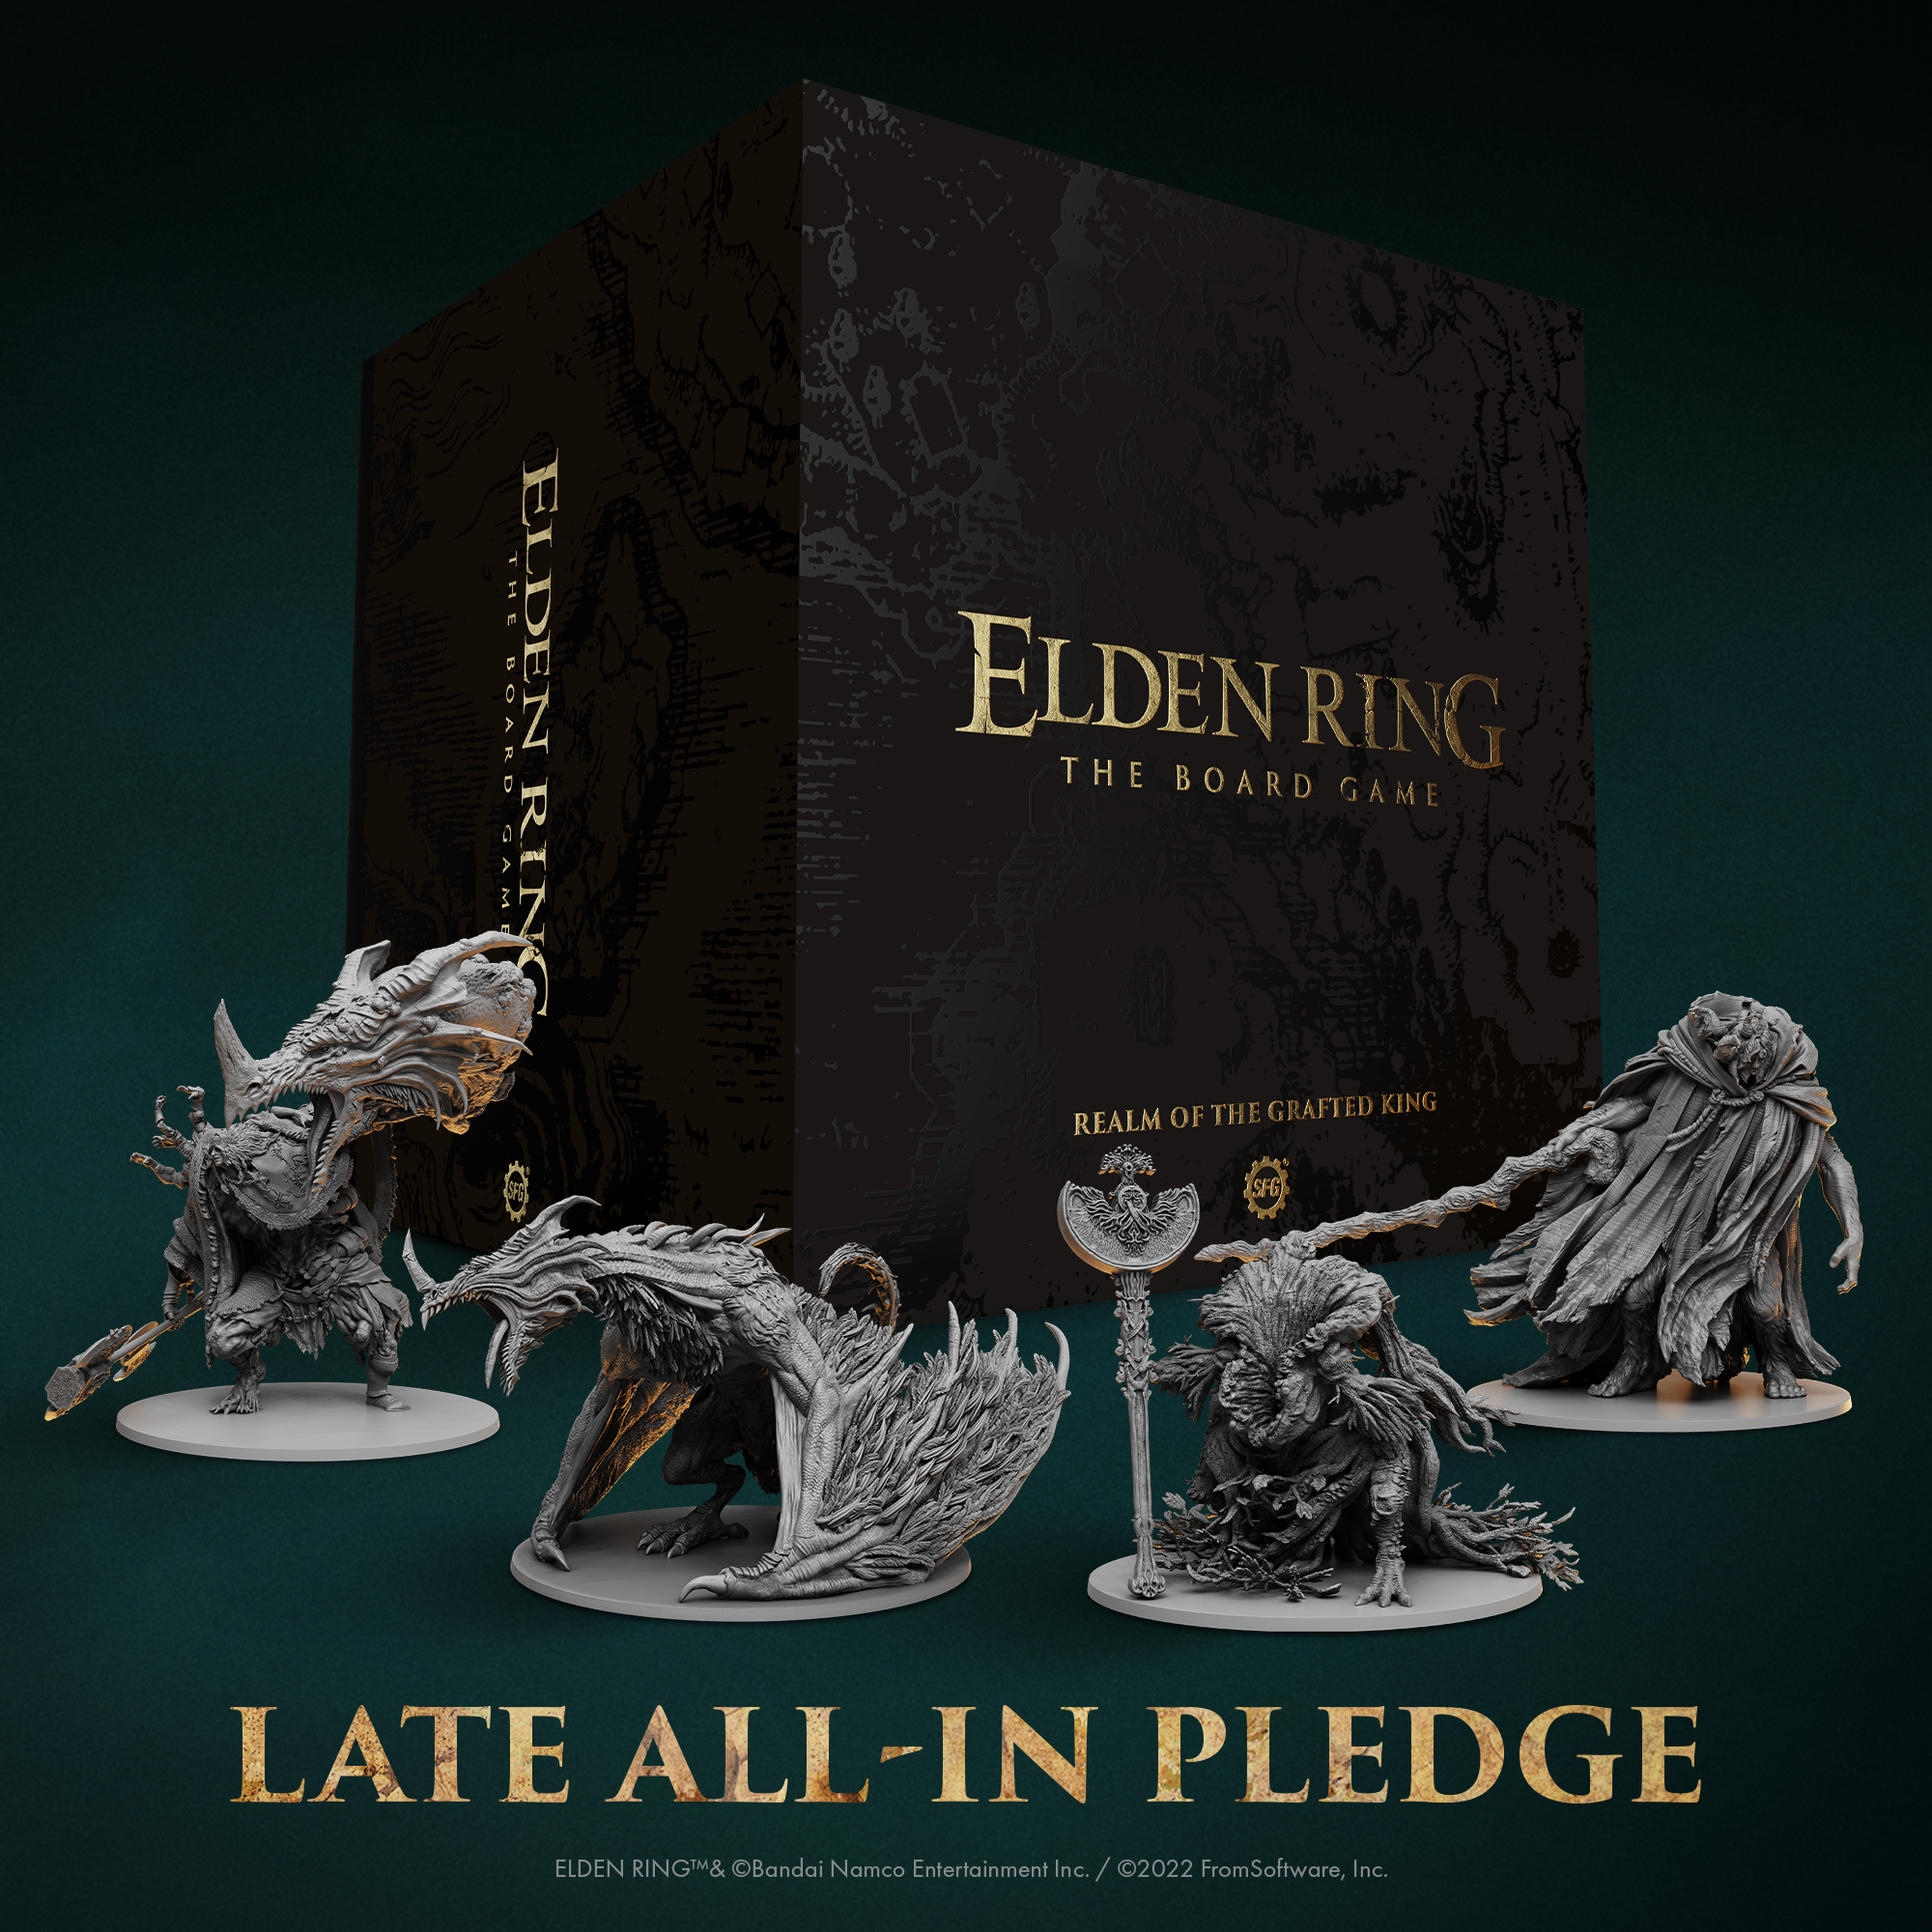 Elden Ring: The Board Game by Steamforged Games - All-in Pledge - Gamefound